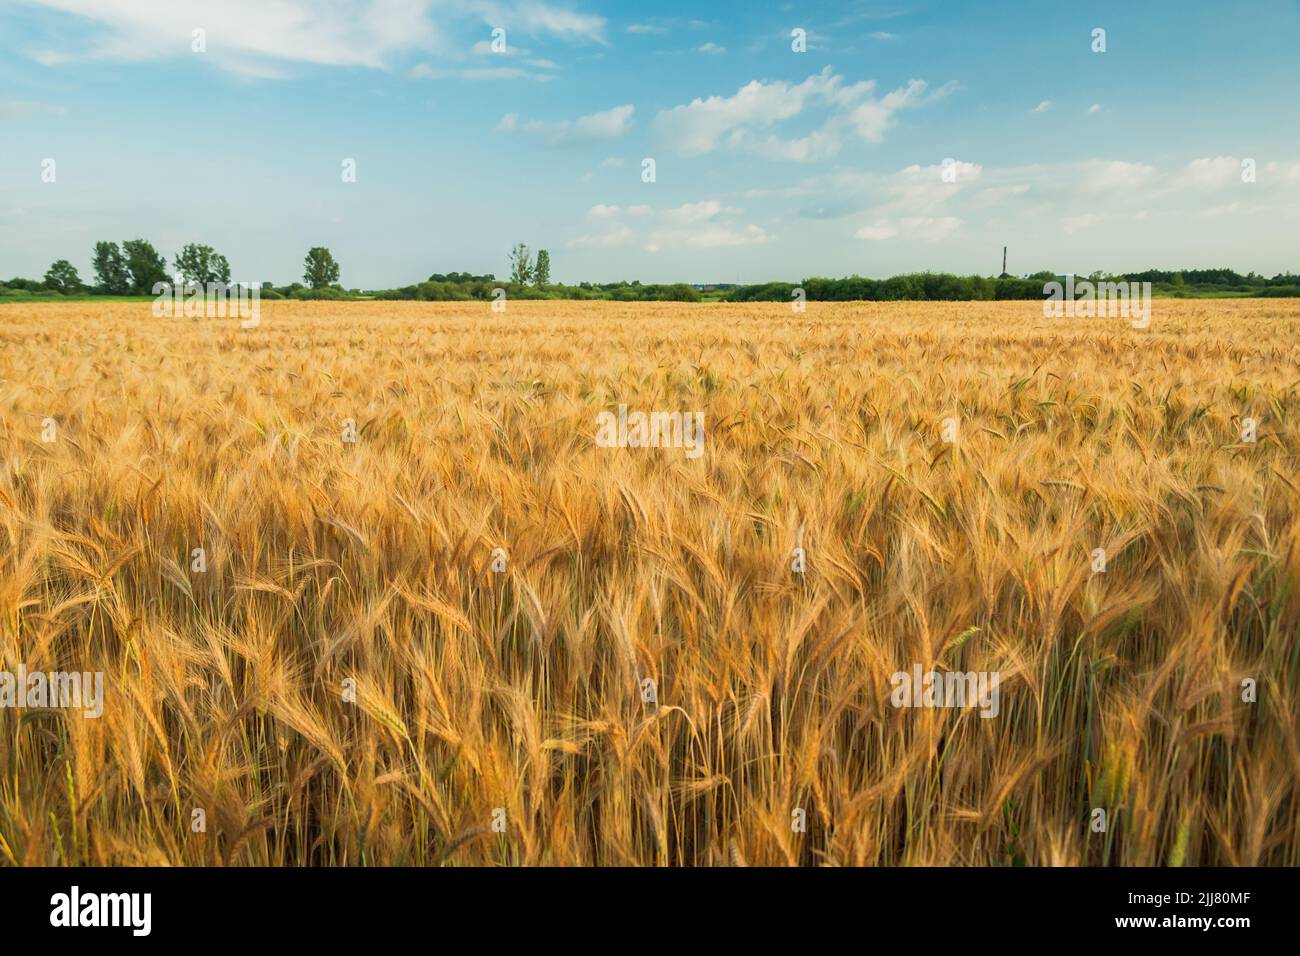 A golden field of barley and blue sky, rural landscape Stock Photo